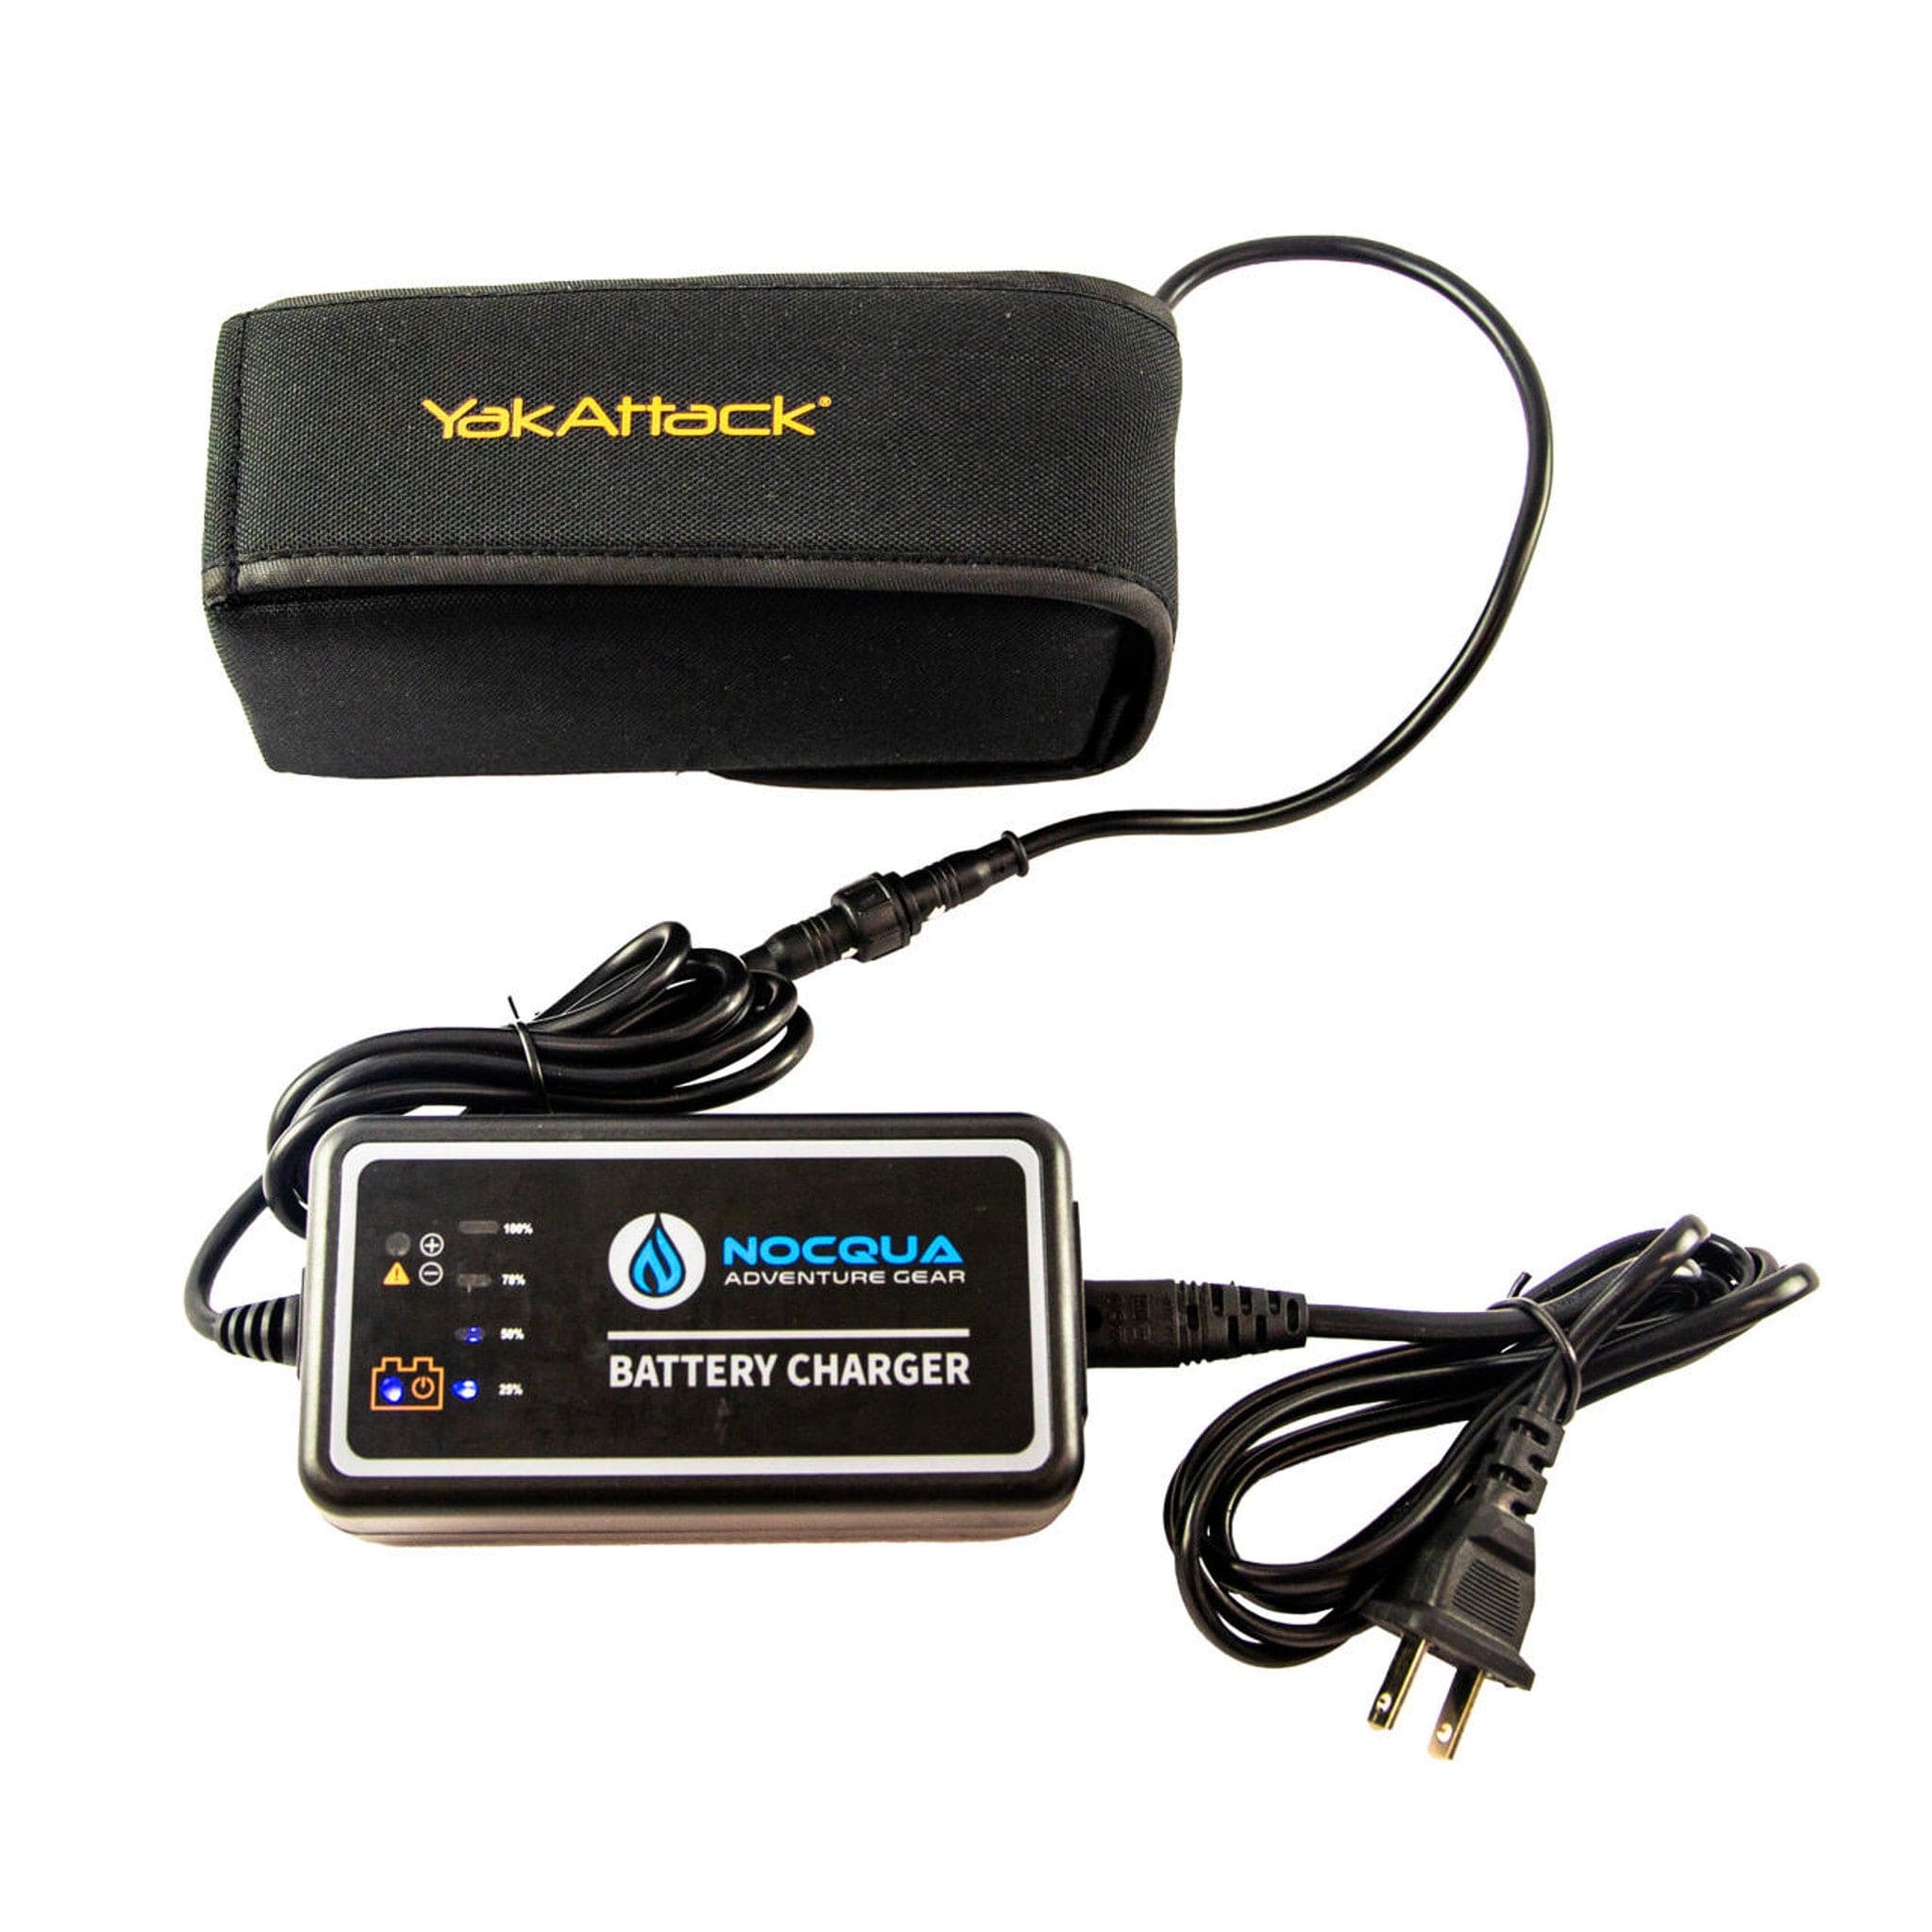 YakAttack 20Ah Lithium-Ion Battery Power Kit with Charger